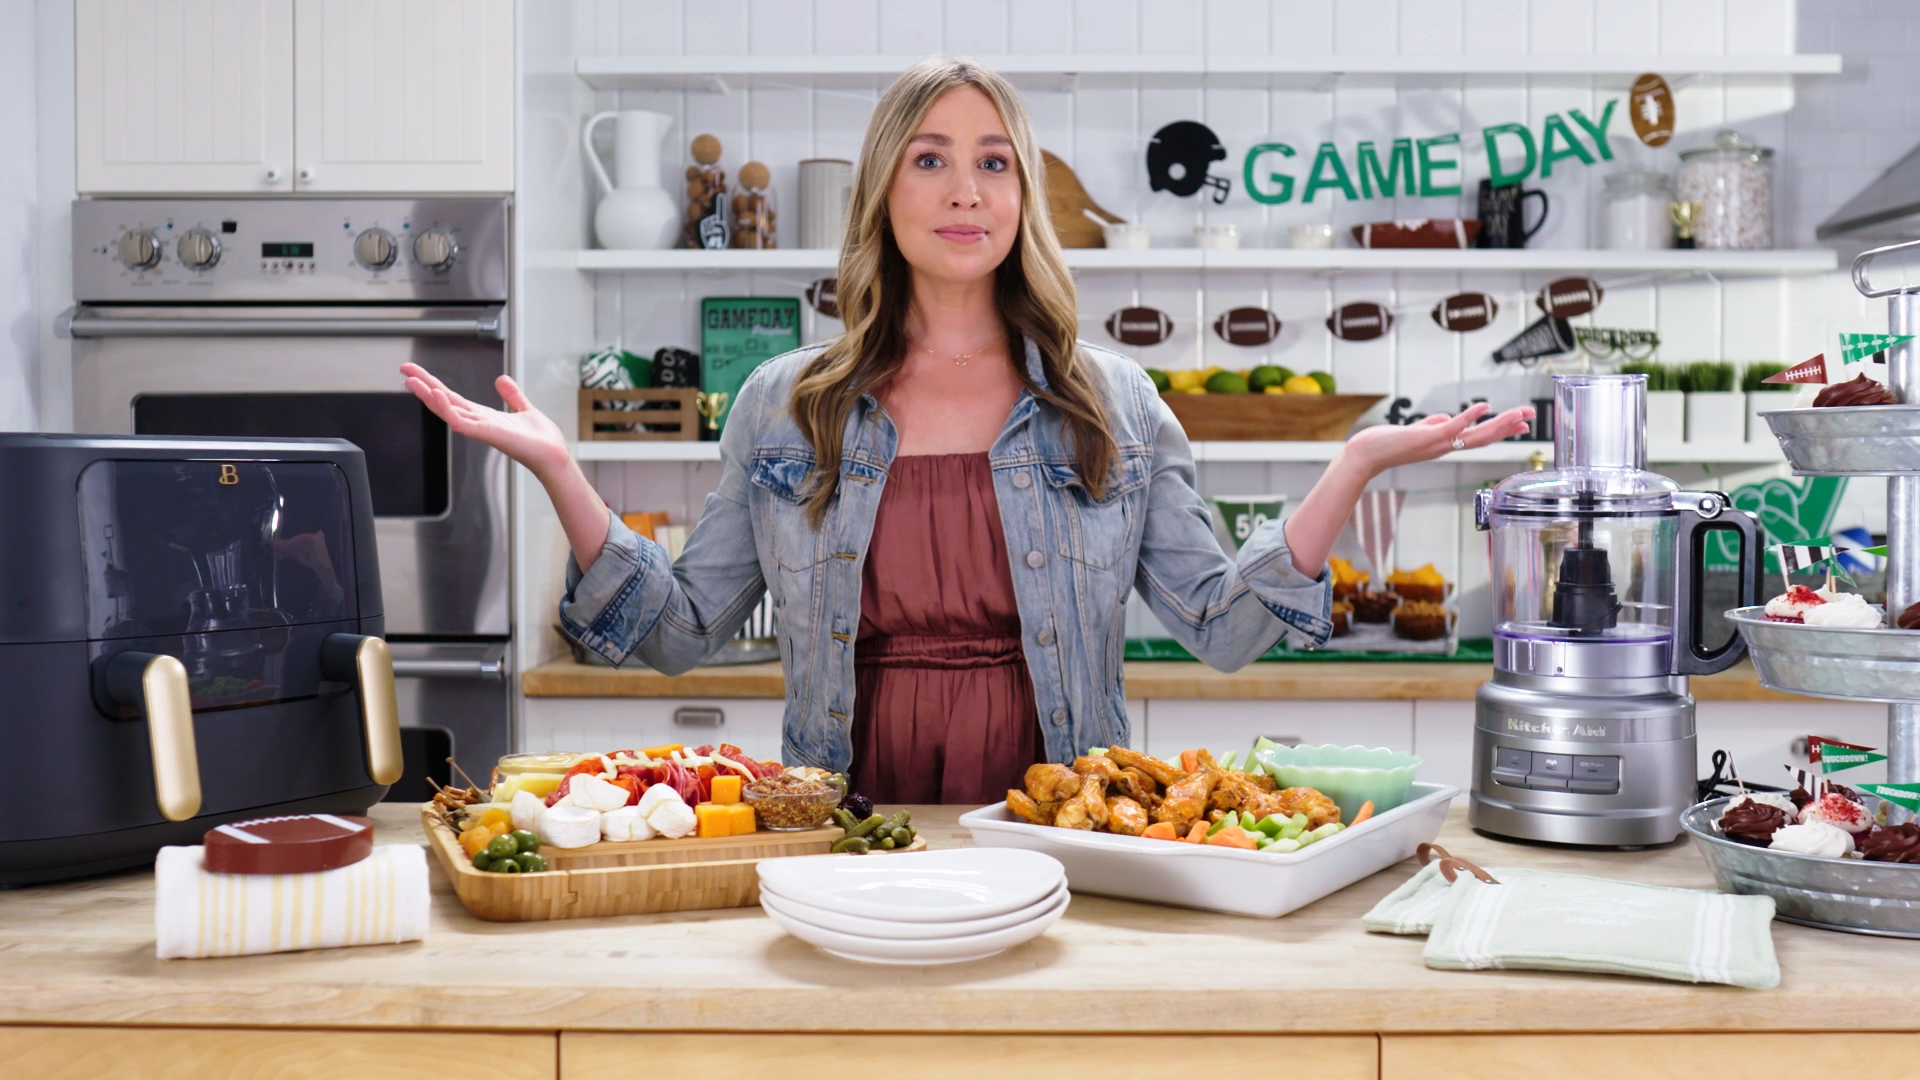 Elevate your game day spread with Skyler Bouchard